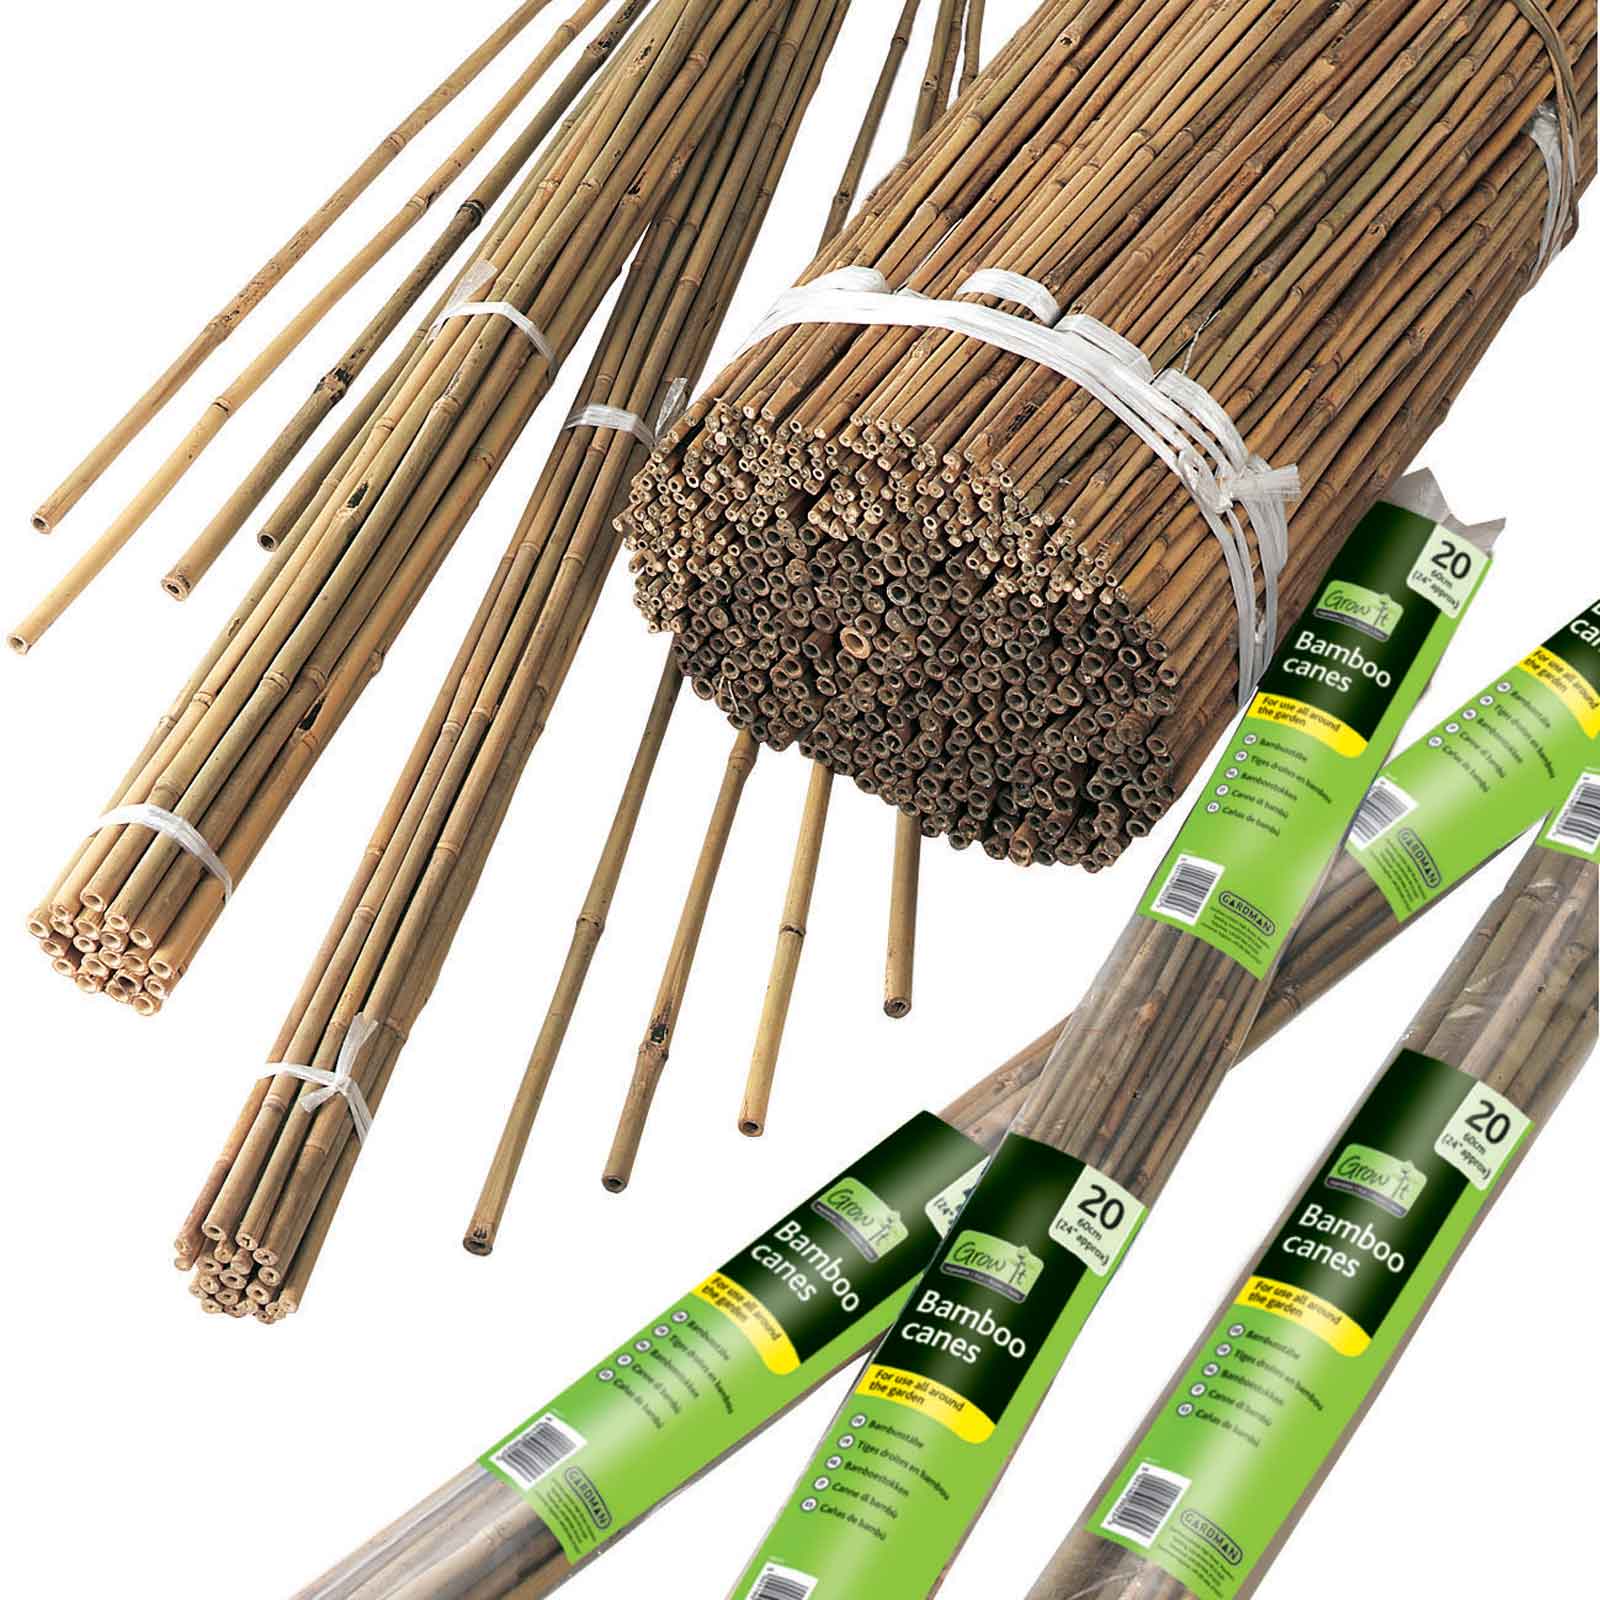 Bamboo Canes - 1.8m Long (20 Pack)